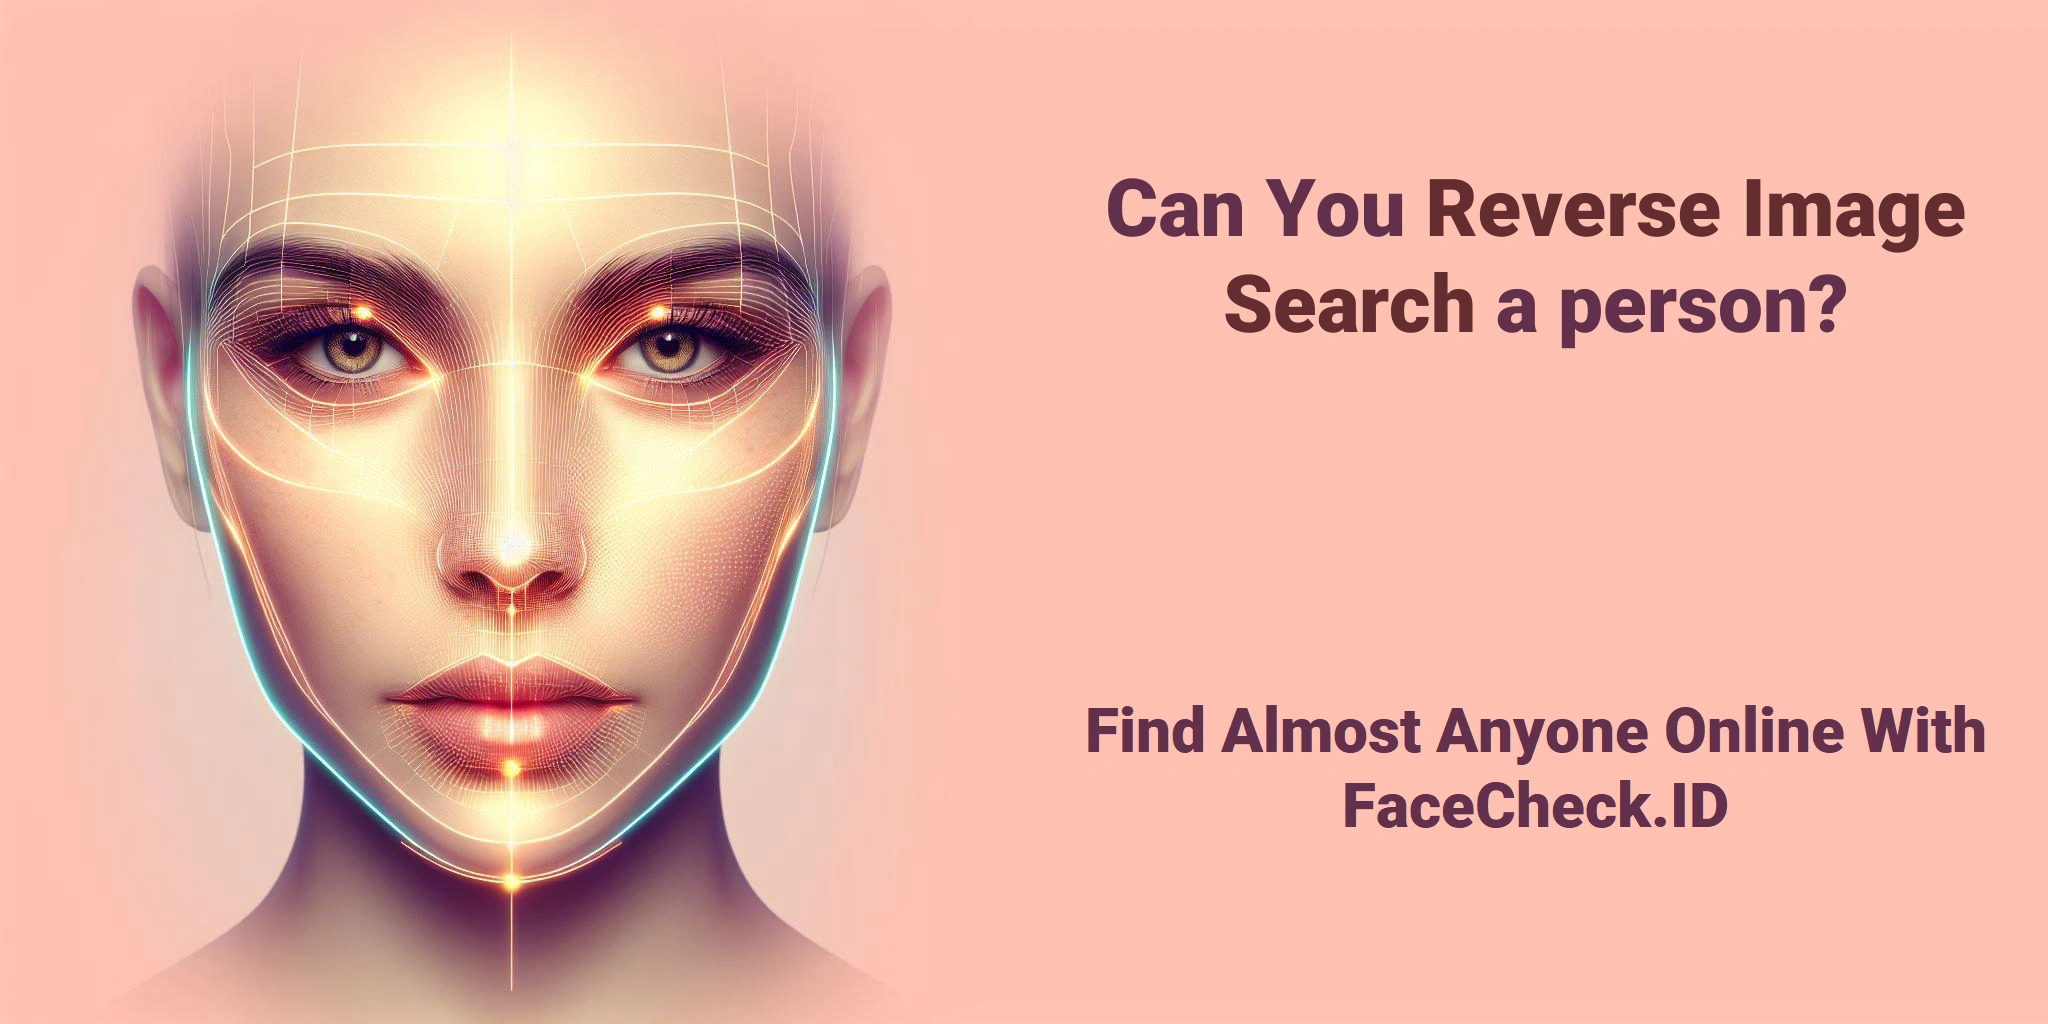 Can You Reverse Image Search a person? Find Almost Anyone Online With FaceCheck.ID